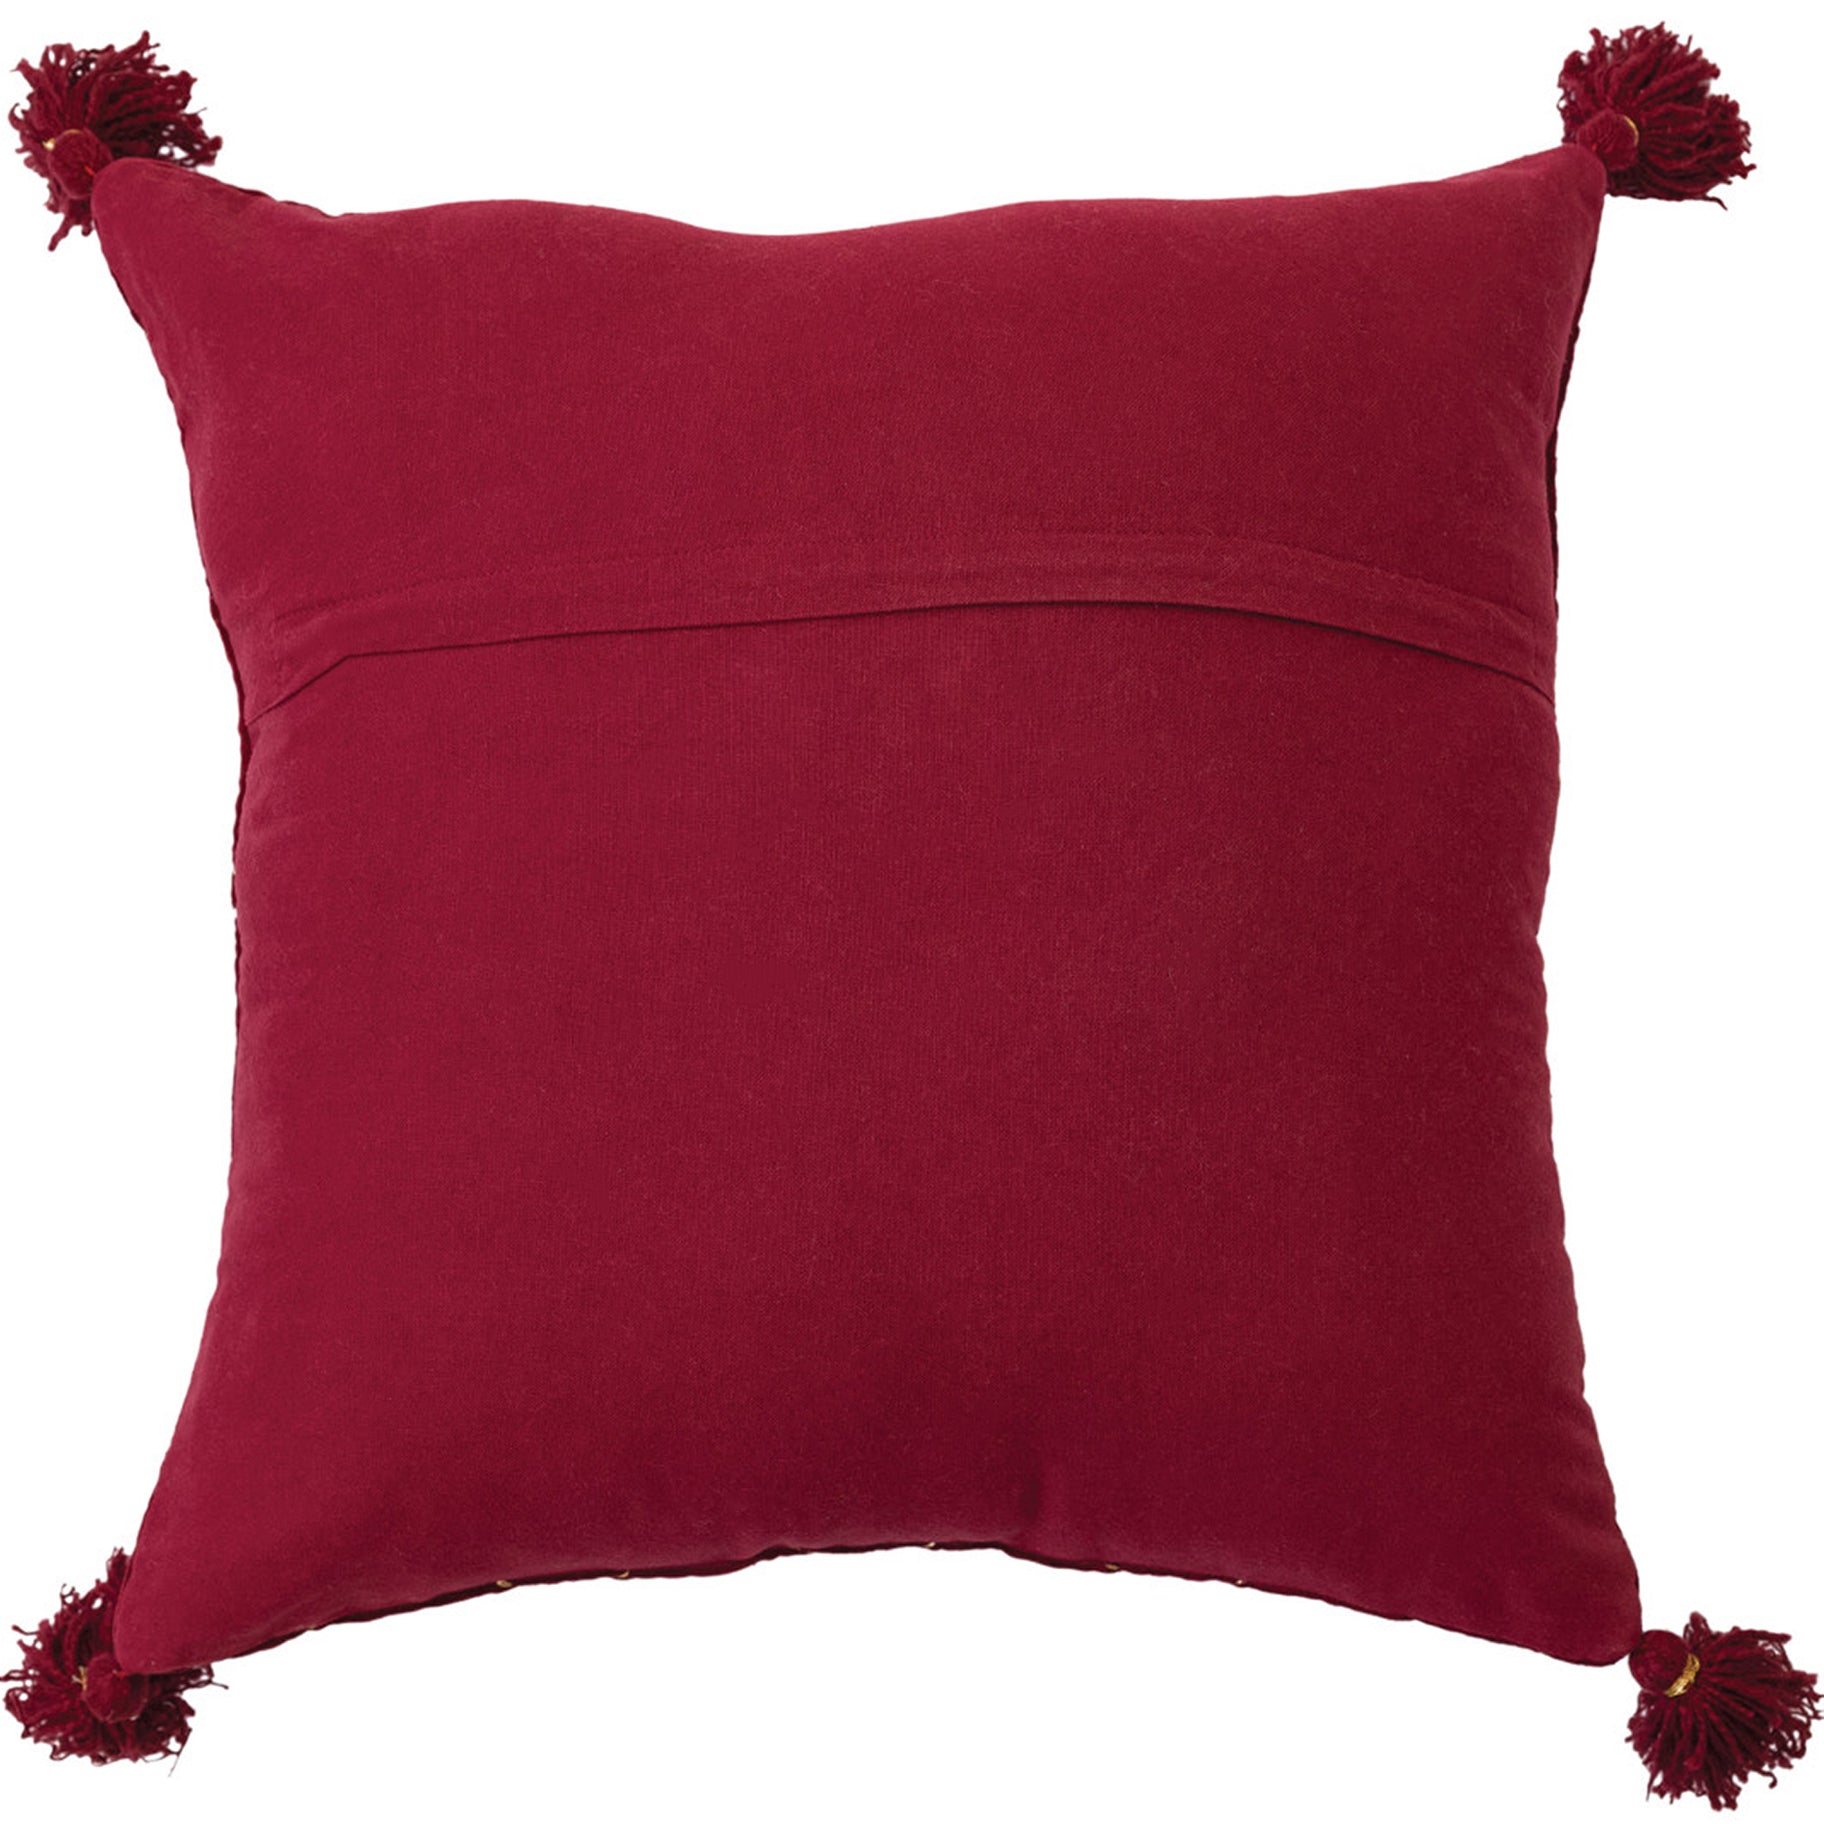 Burgundy Red Quilted Velvet Cotton Pillow With Gold Embroidery